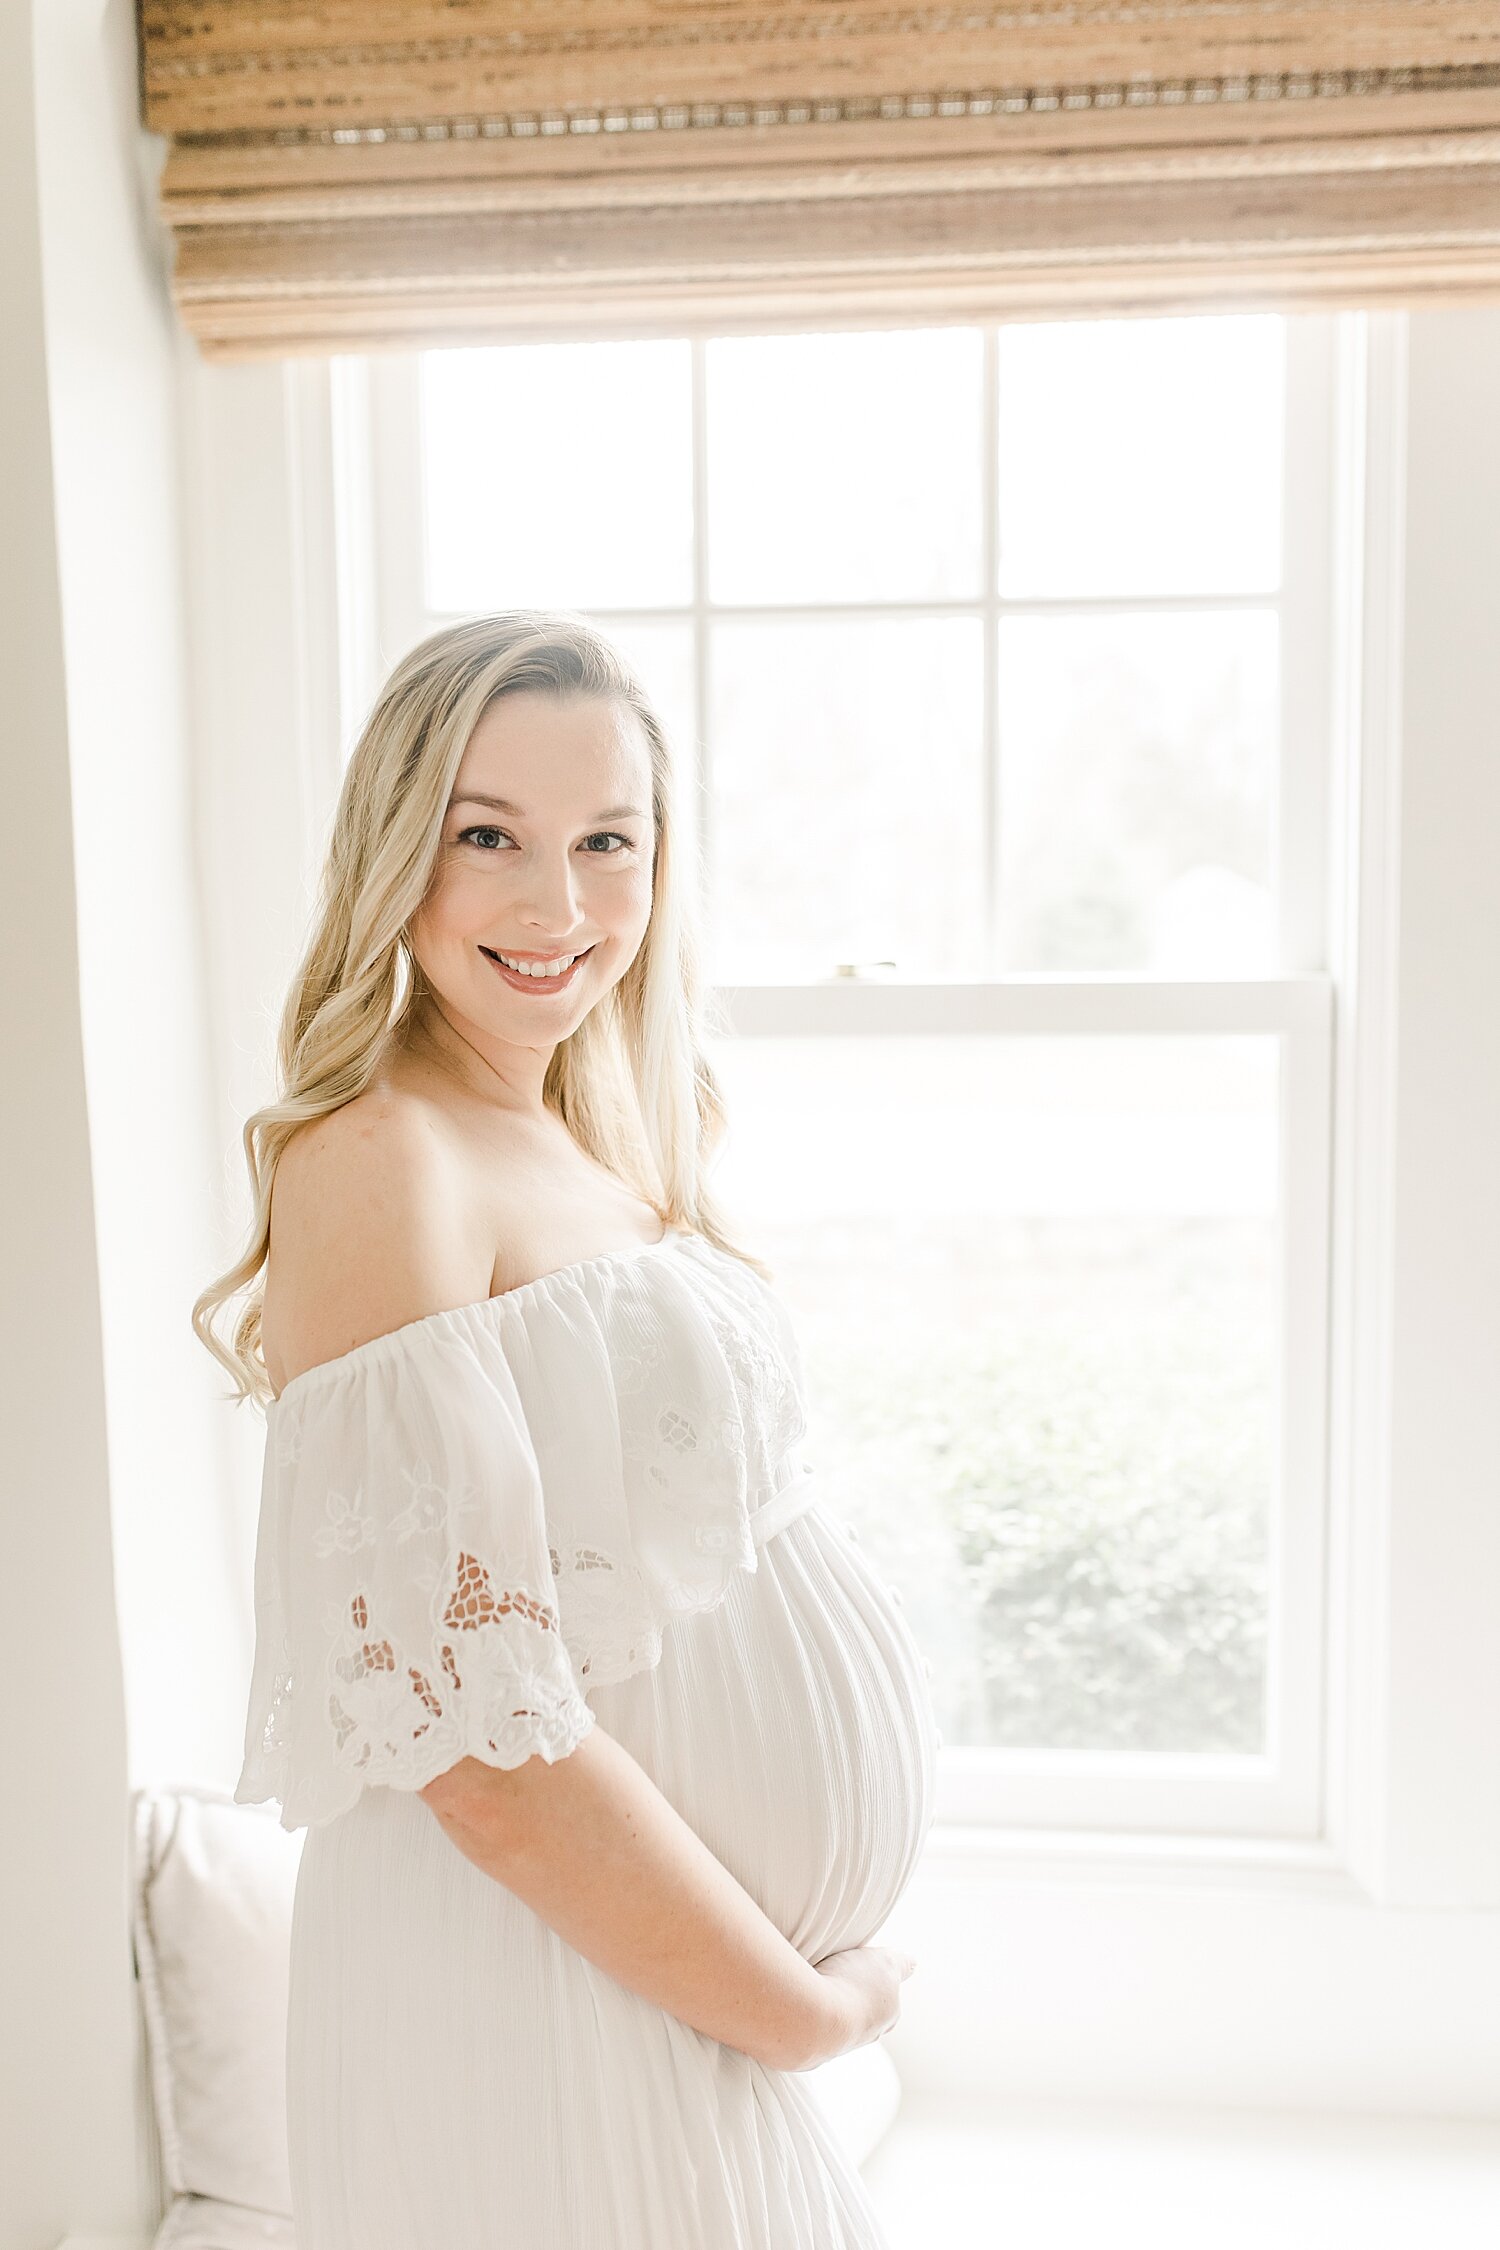 Pregnant mom wearing fillyboo maternity dress. Photo by Kristin Wood Photography.